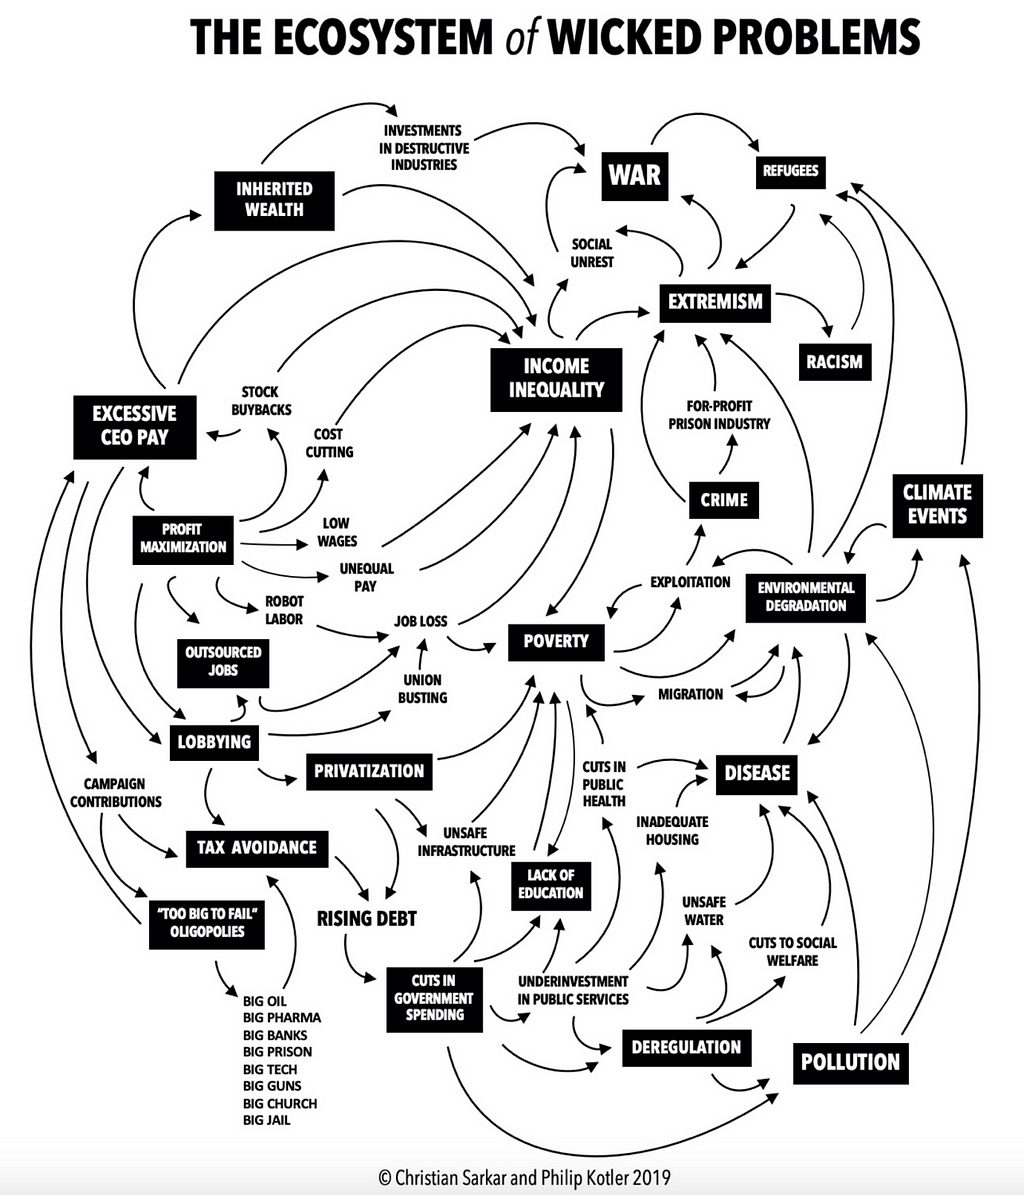 A black and white ecosystem map of wicked problems connected by arrow lines showing how they are interconnected.